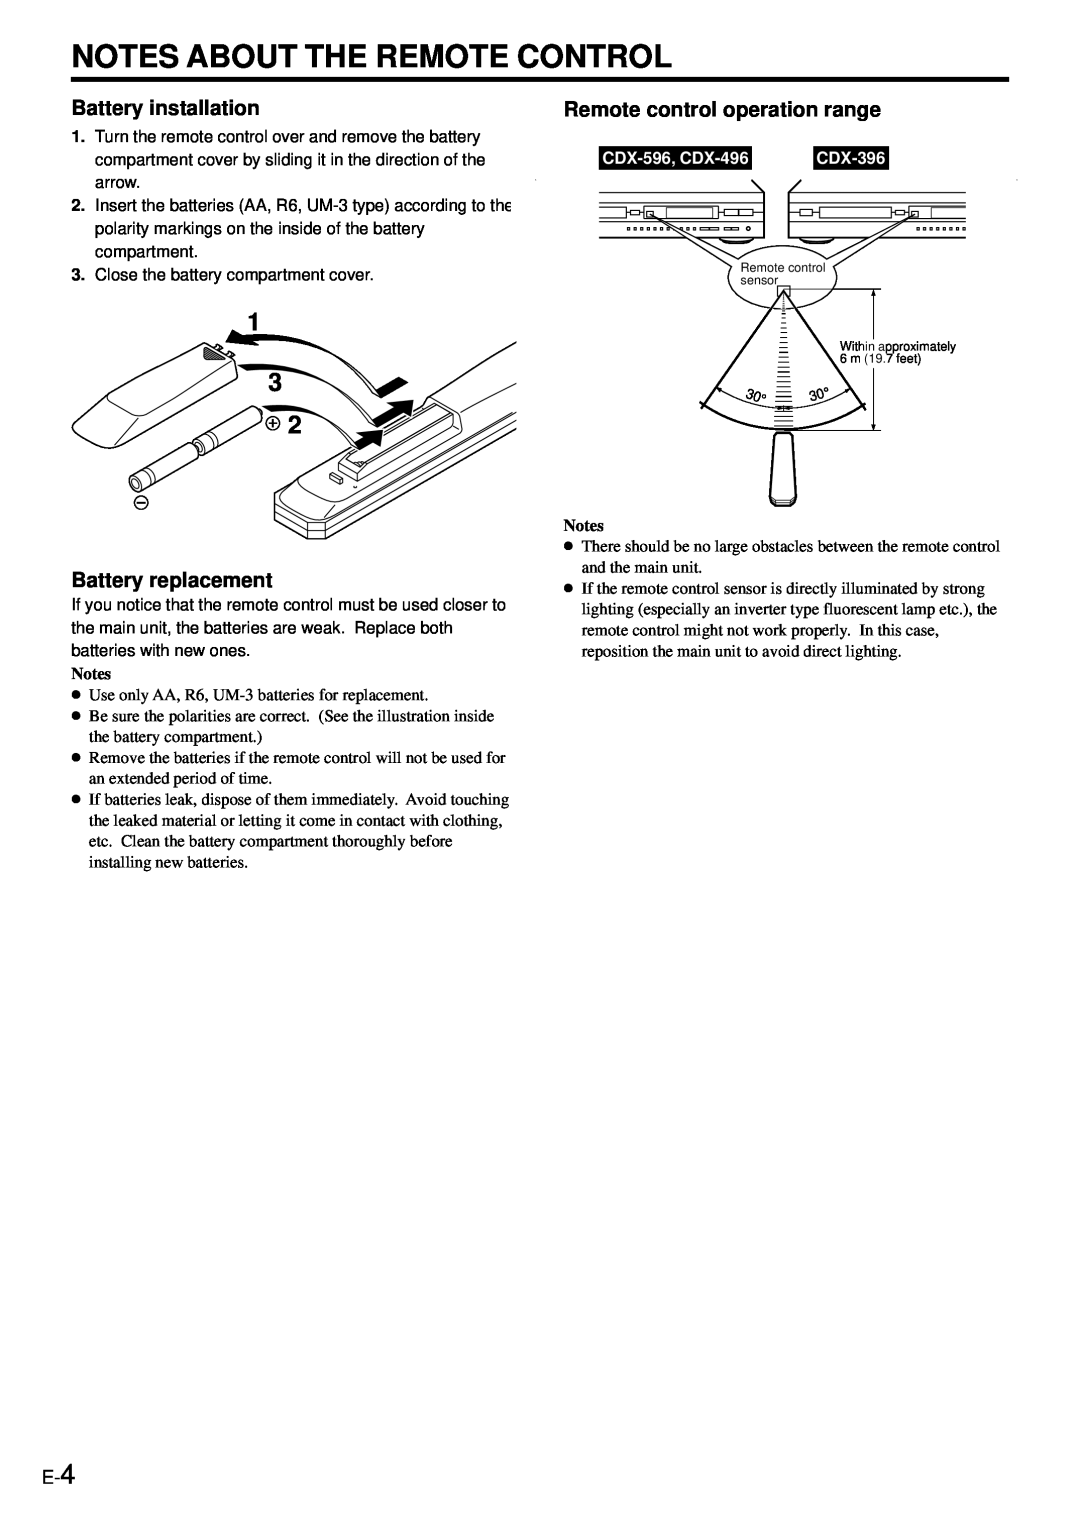 Yamaha CDX-396 owner manual Notes About The Remote Control, CDX-596, CDX-496 